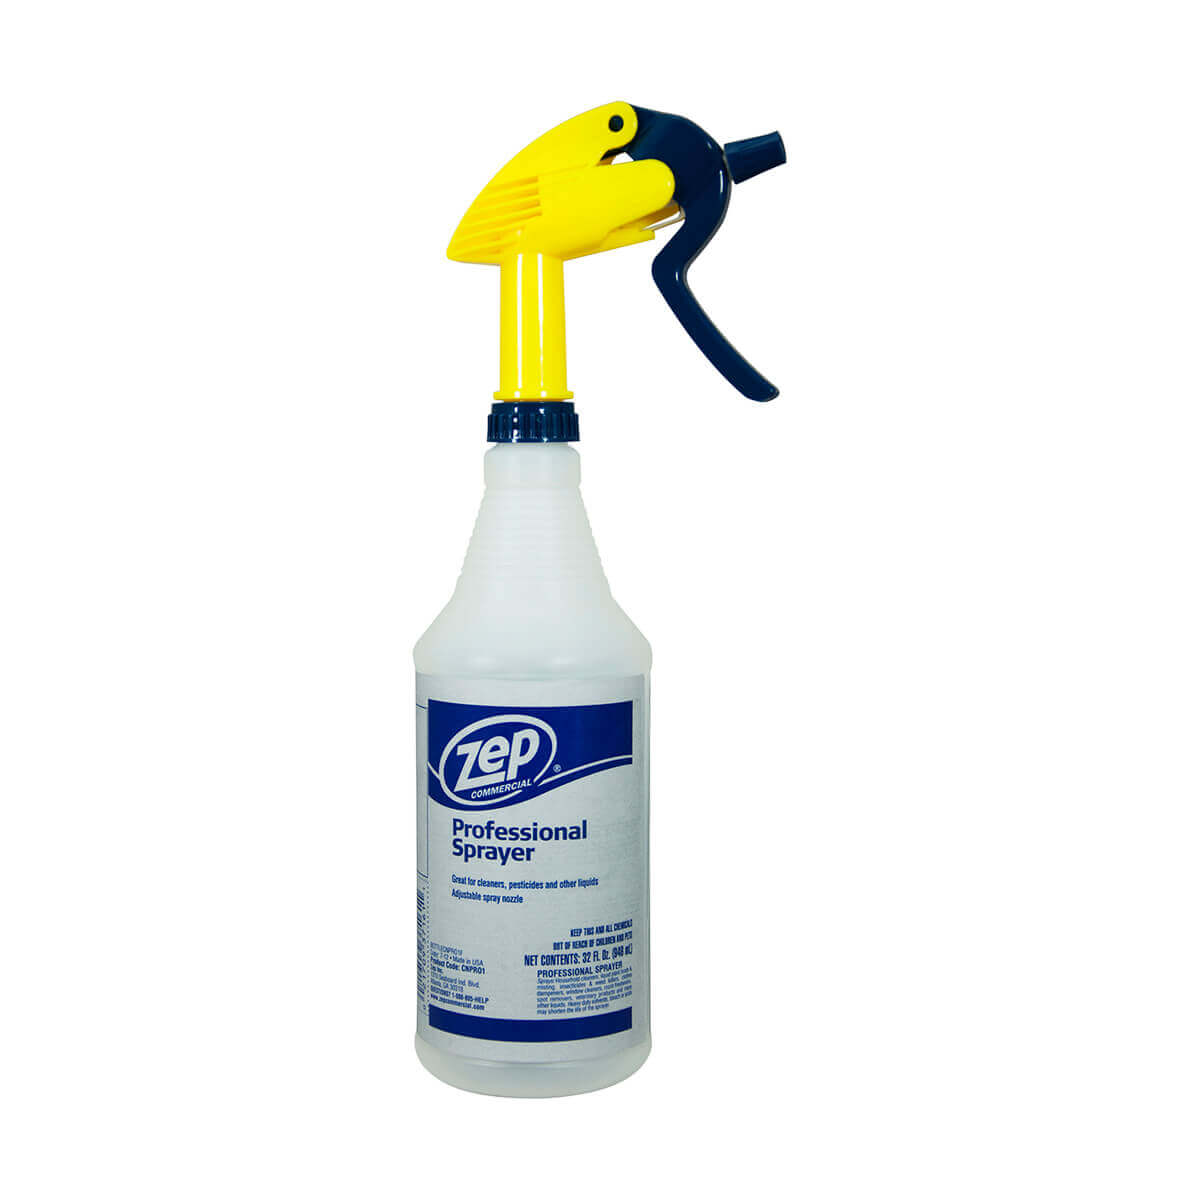 Zep Commercial Professional Sprayer - 946 ml